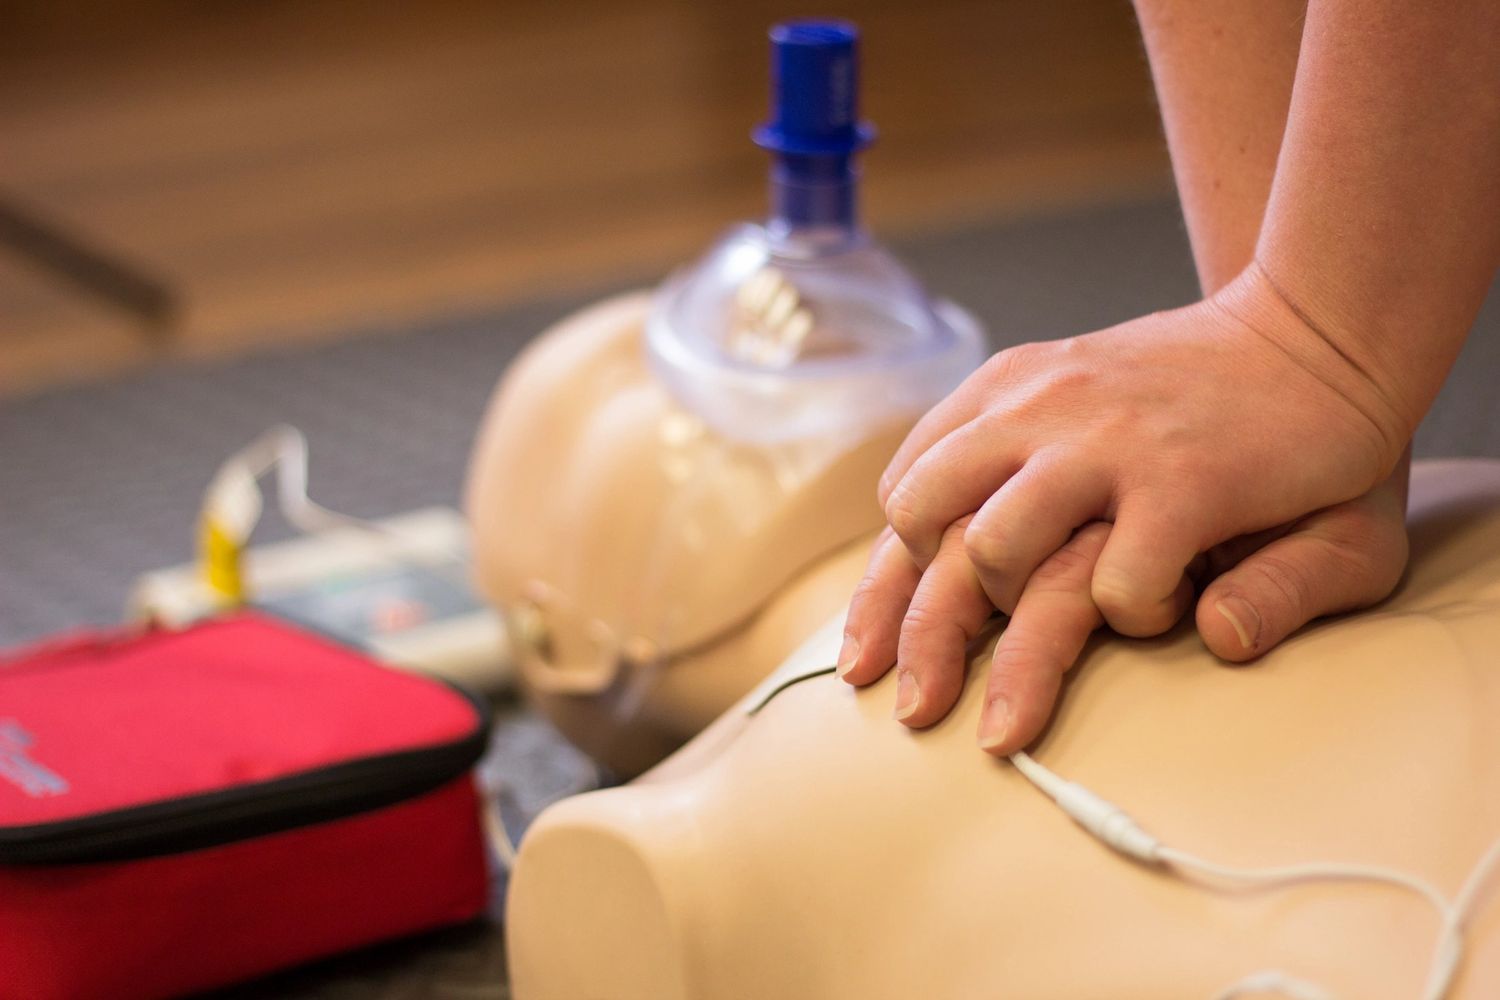 Person performing CPR on a manikin